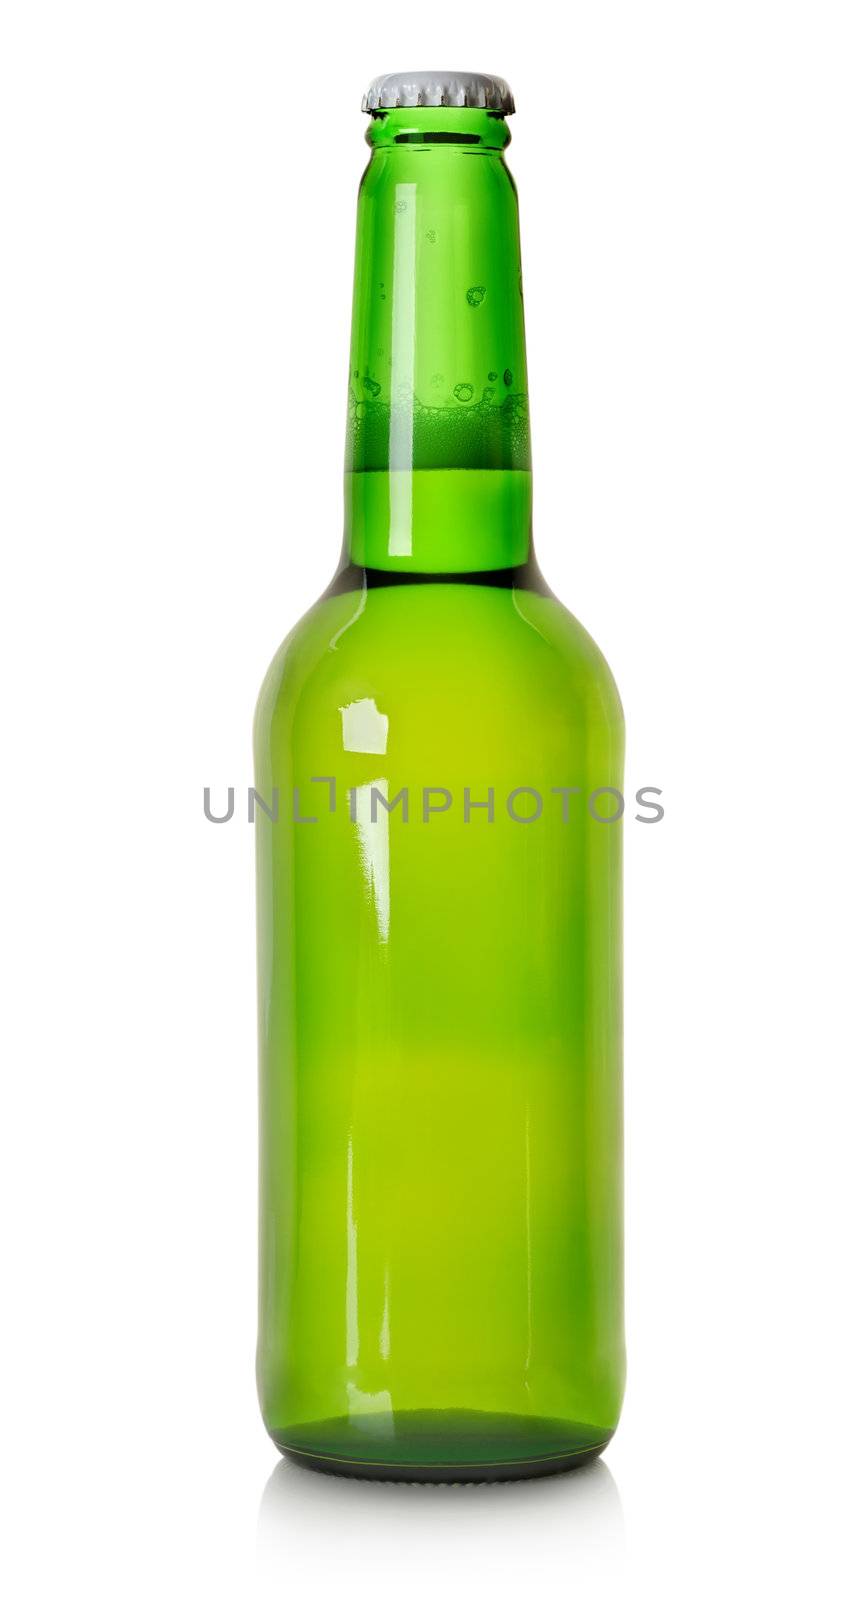 Beer in a green bottle isolated on a white background